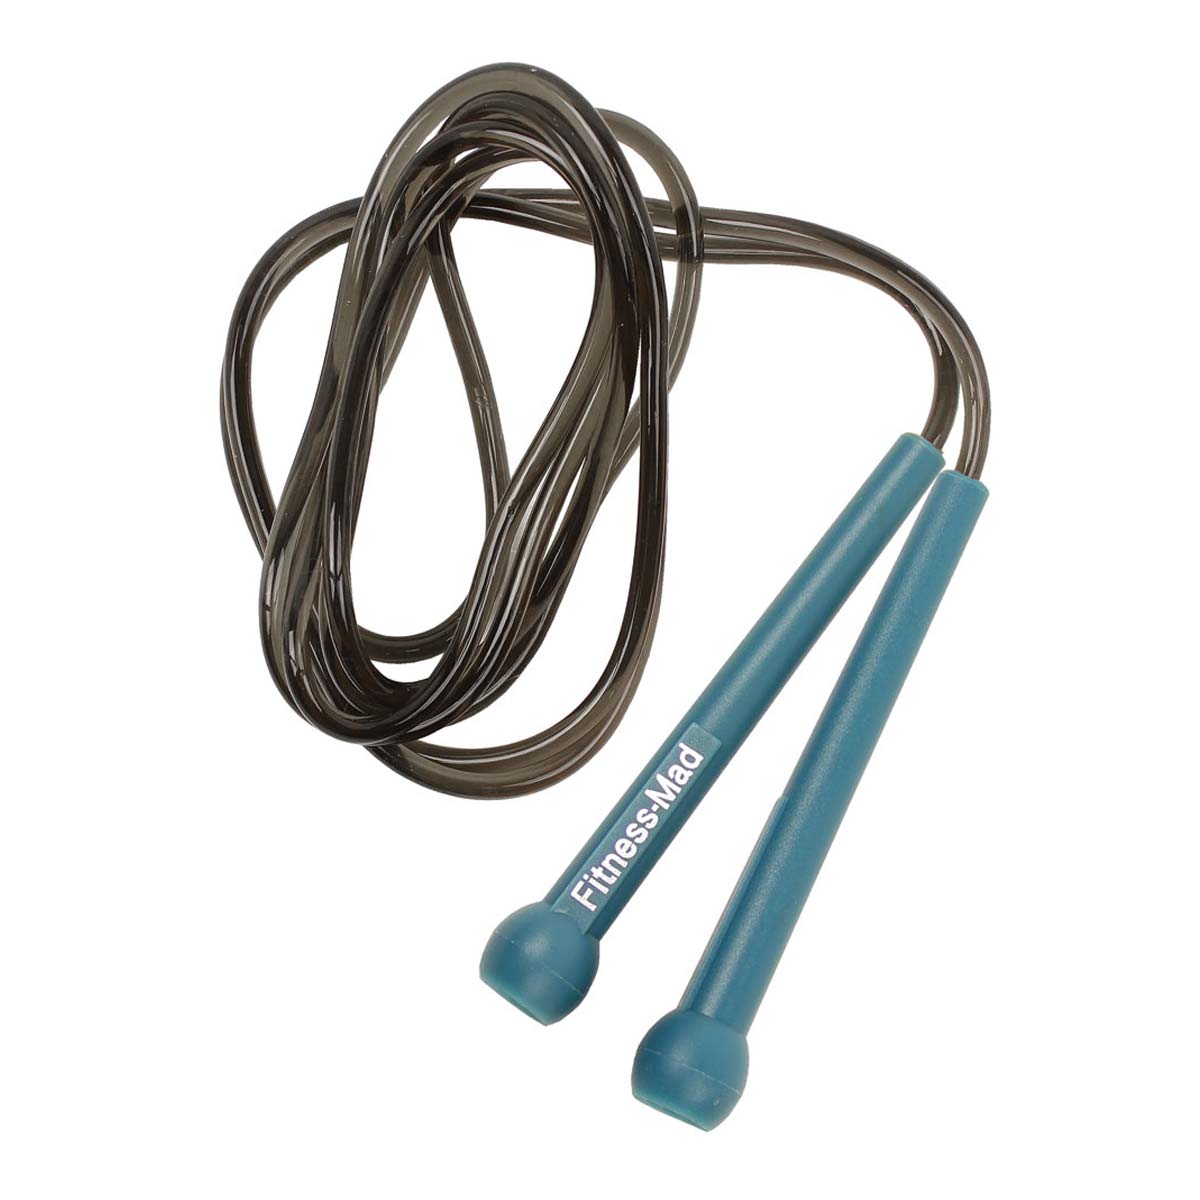 Fitness Mad Speed Skipping Rope - 9FT - Blue